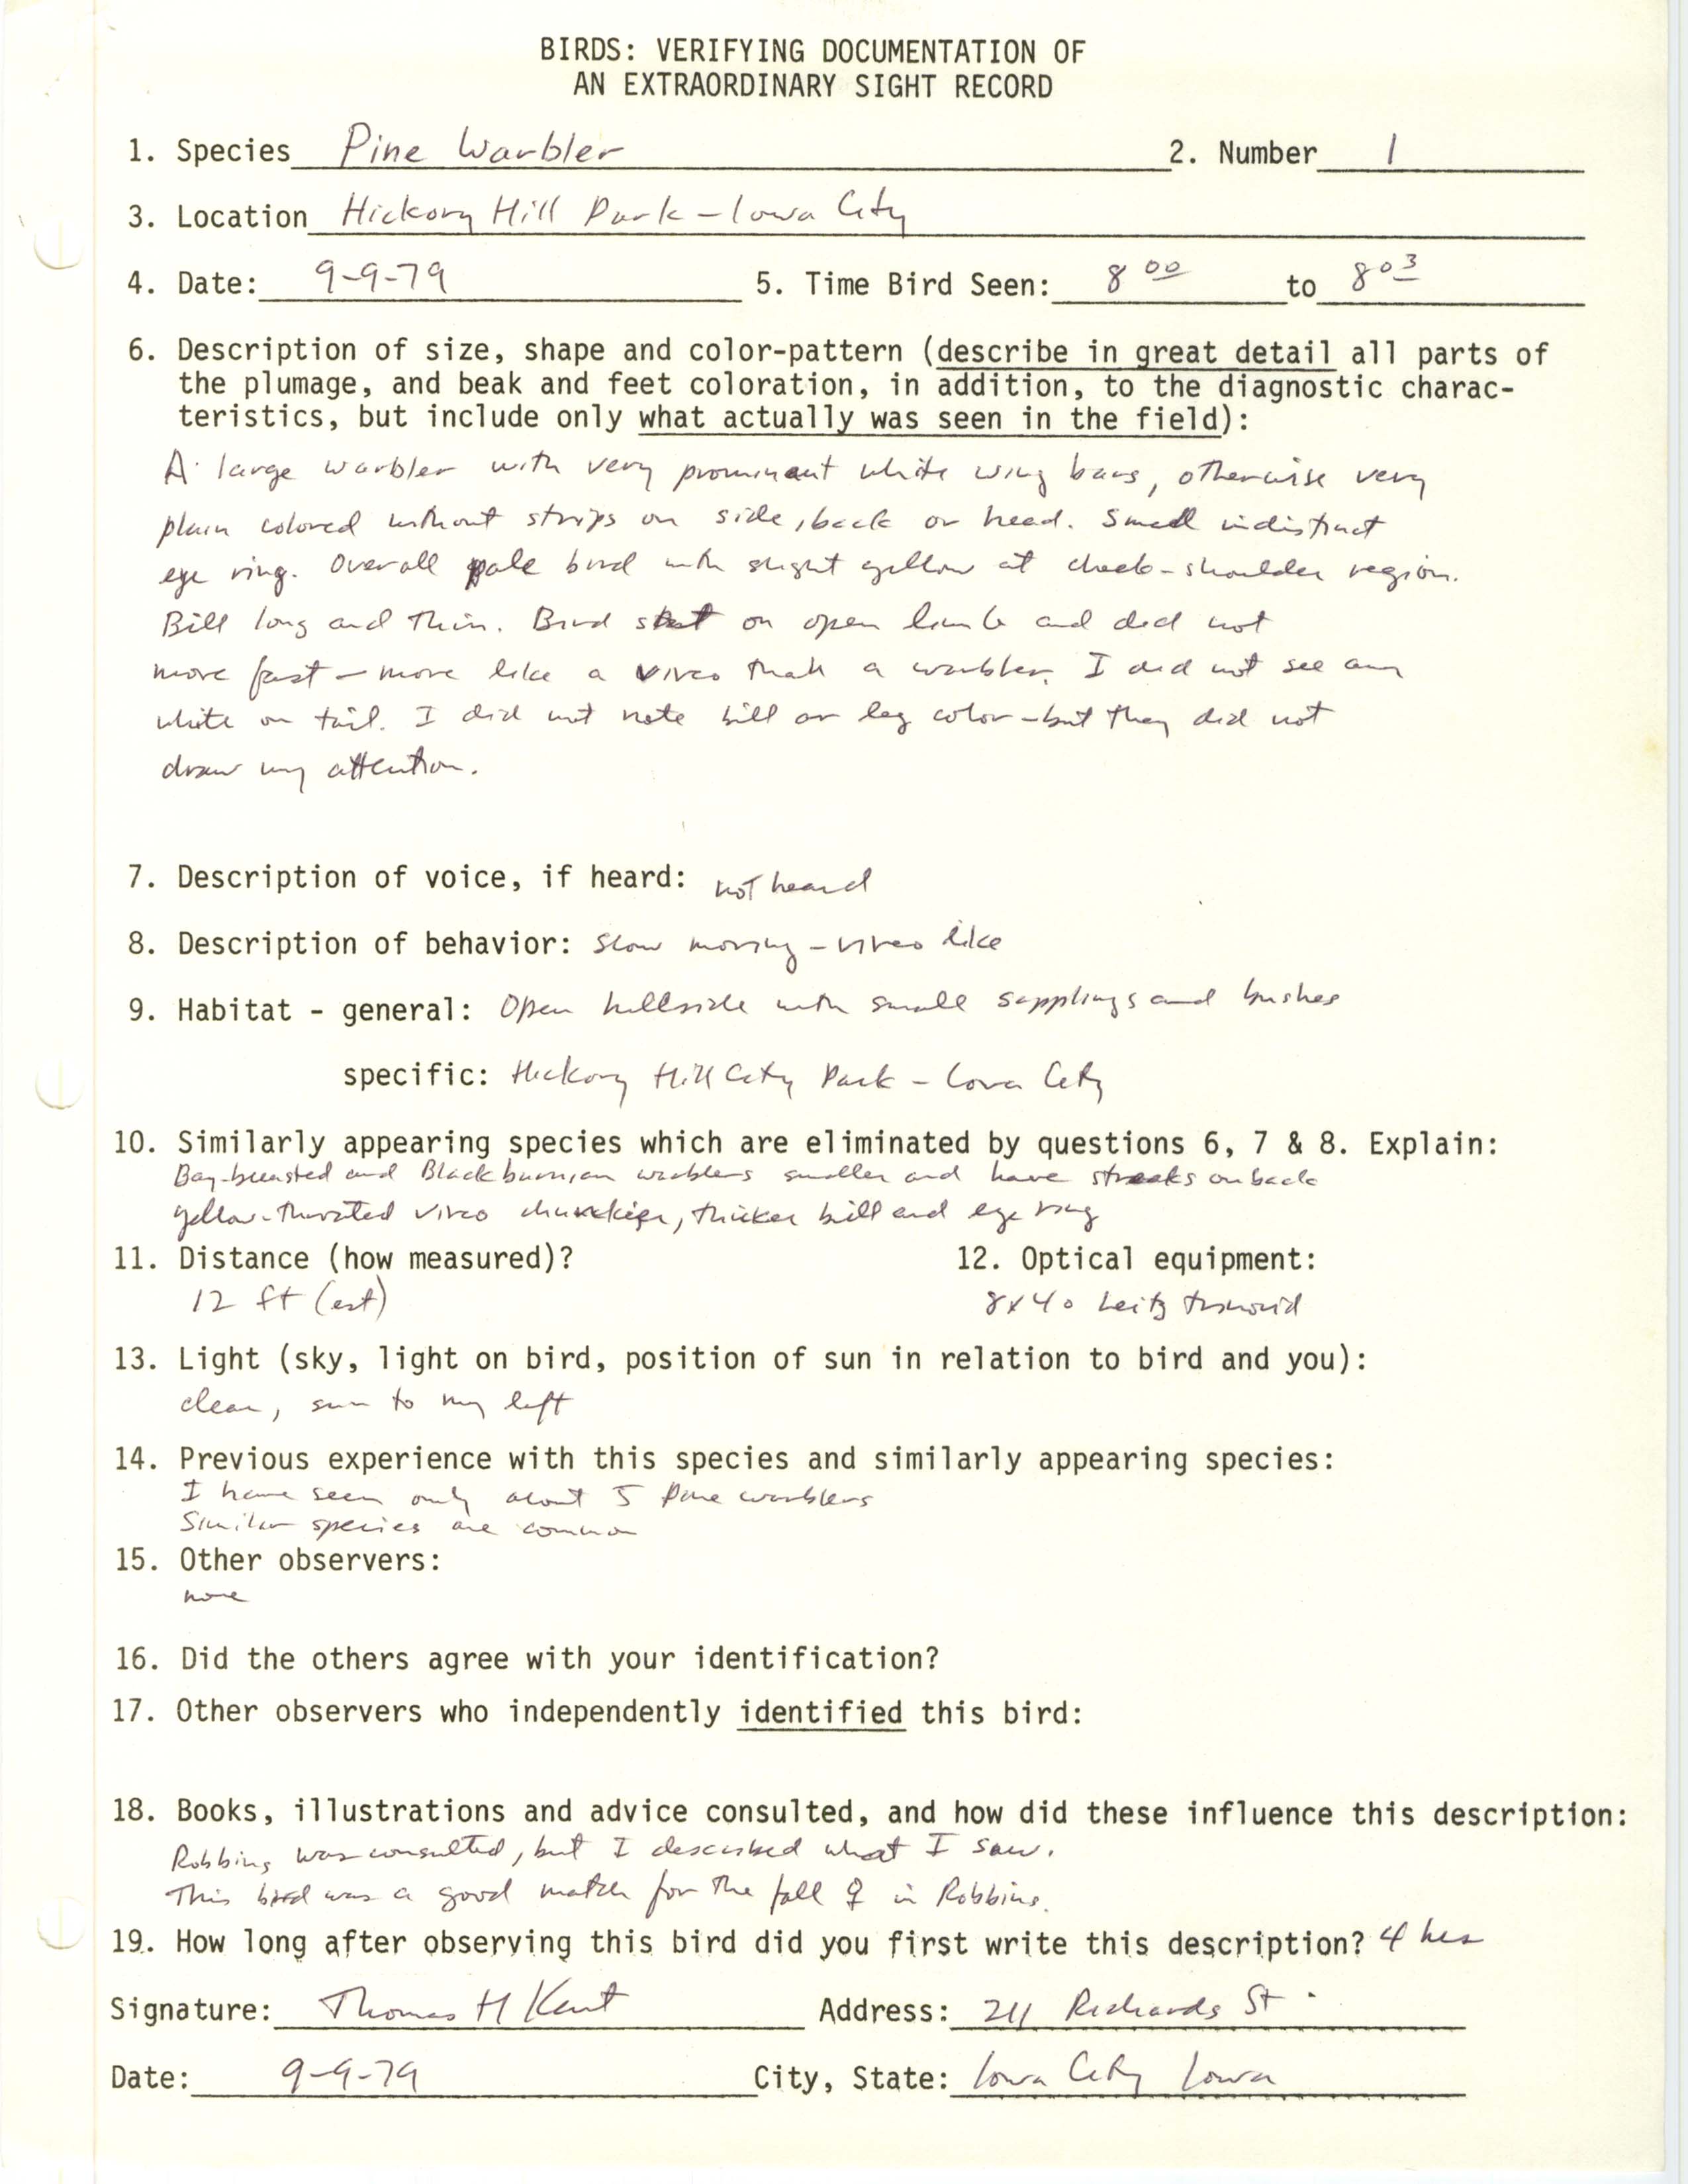 Rare bird documentation form for Pine Warbler at Hickory Hill Park in Iowa City, 1979